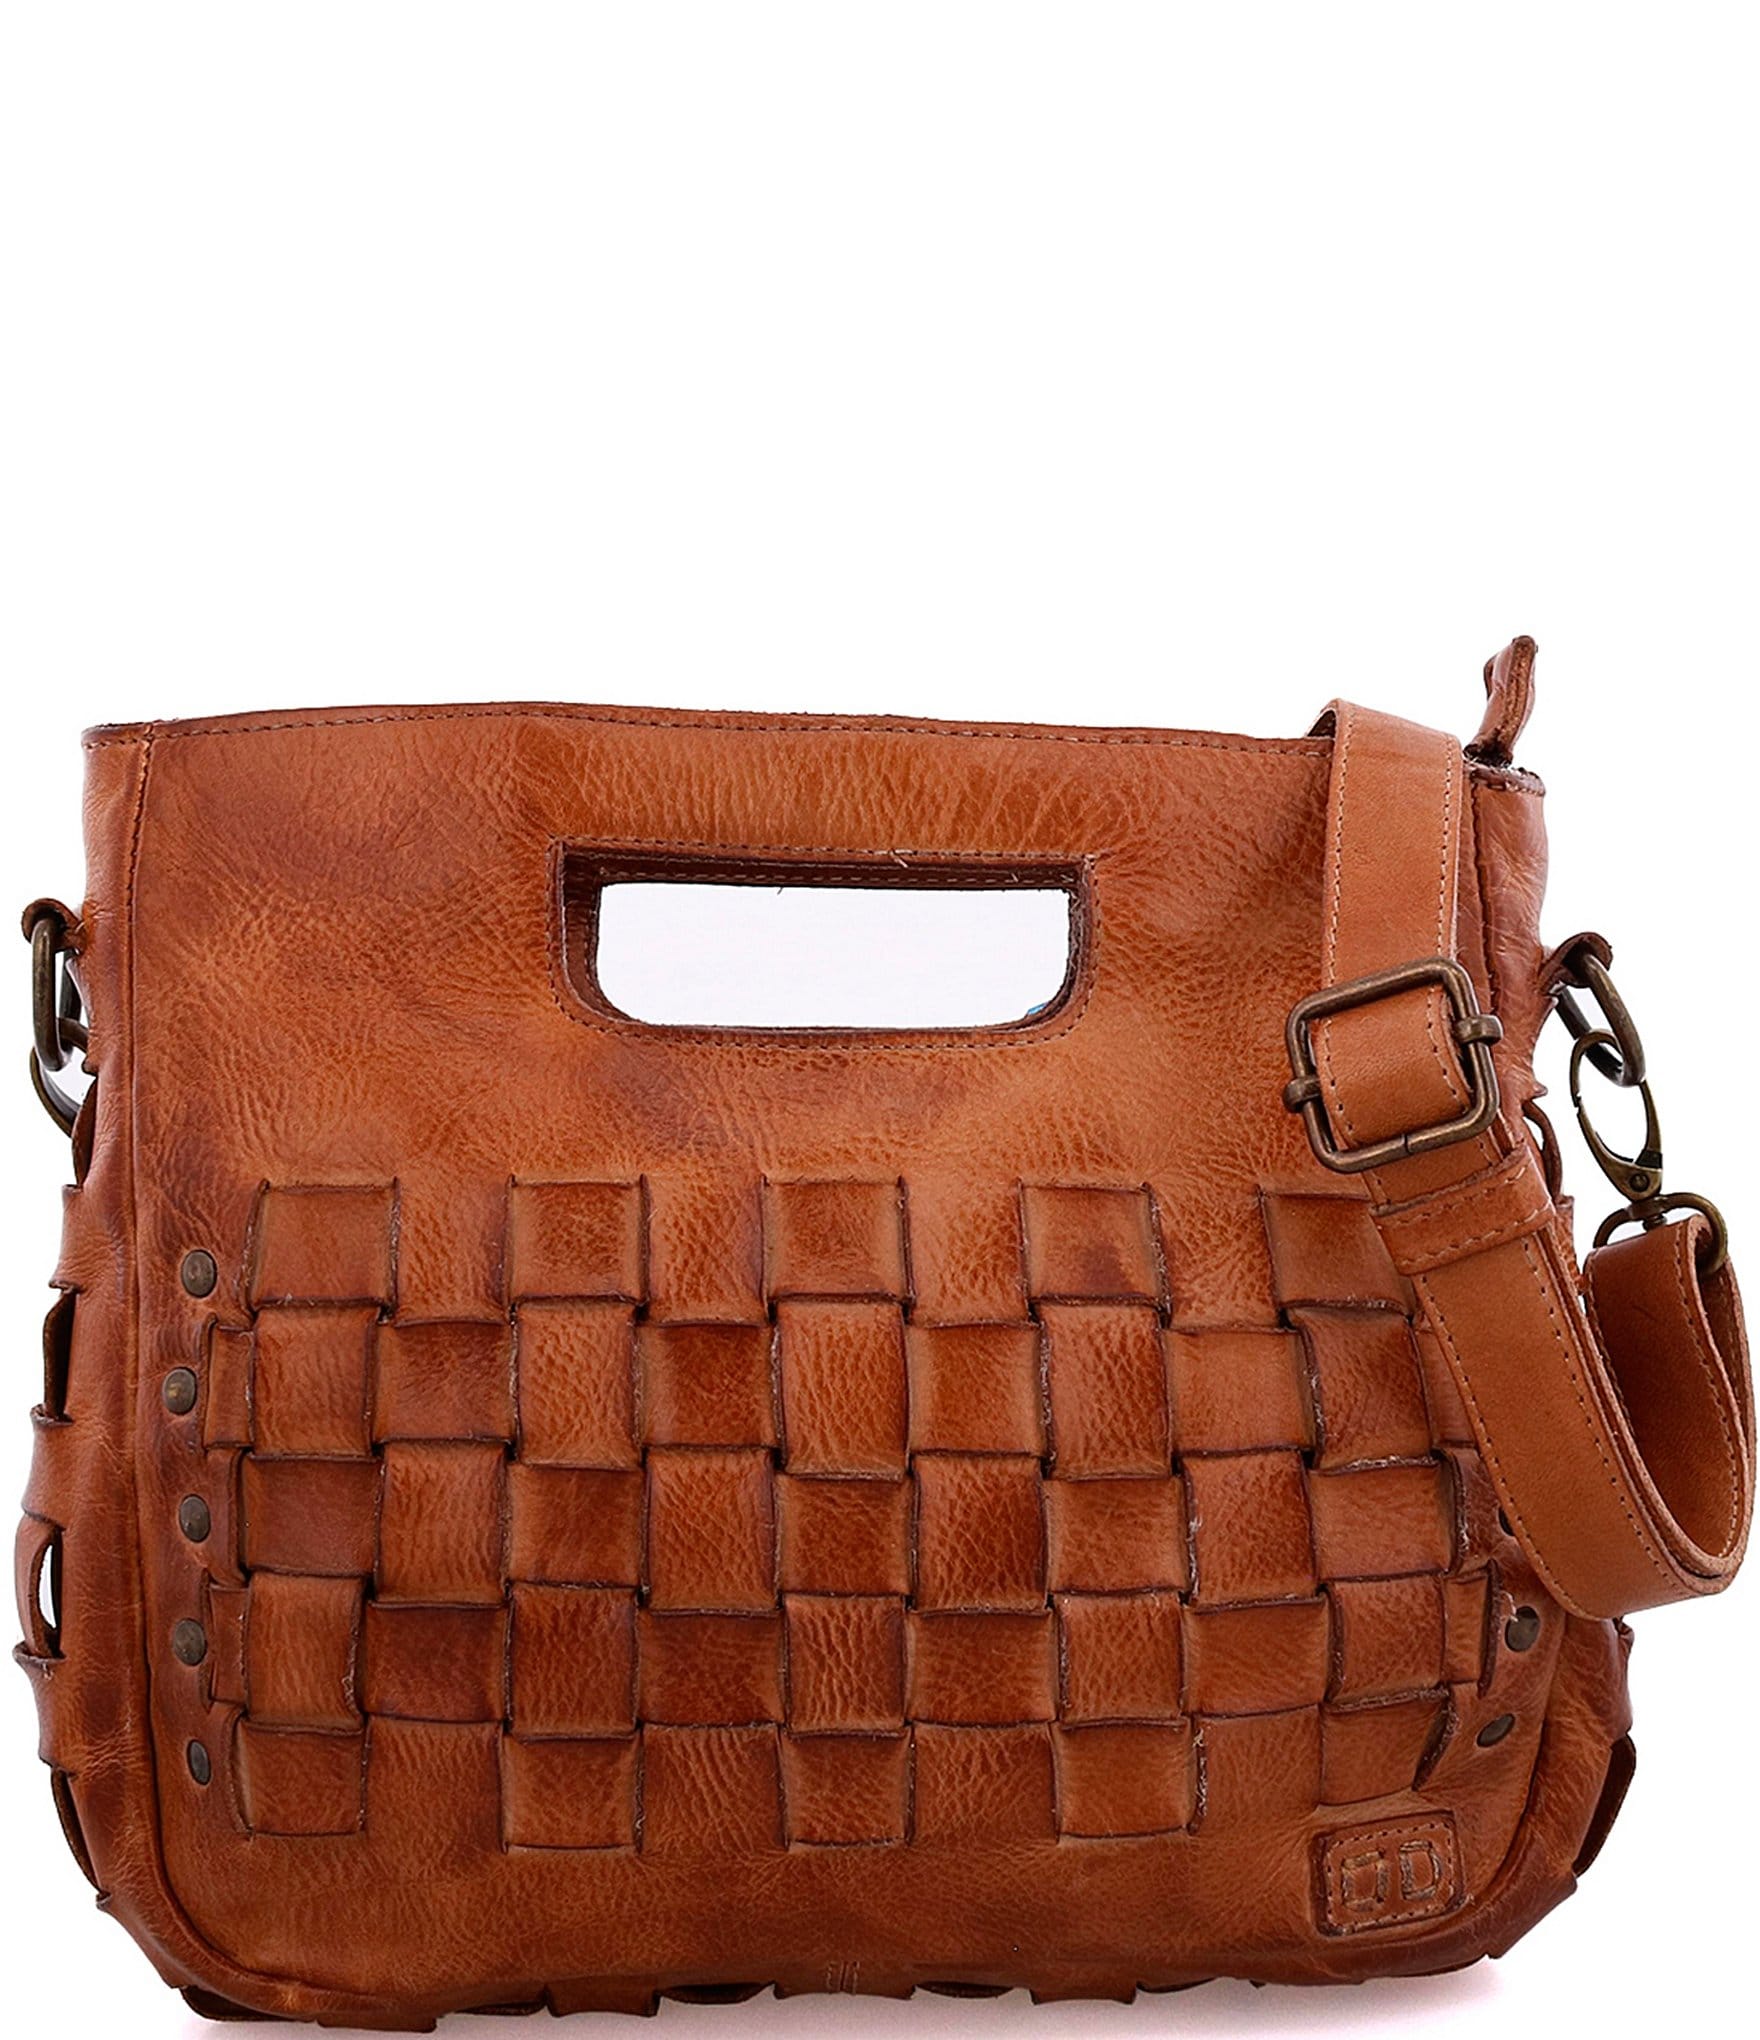 WOVEN LEATHER BAG - Brown